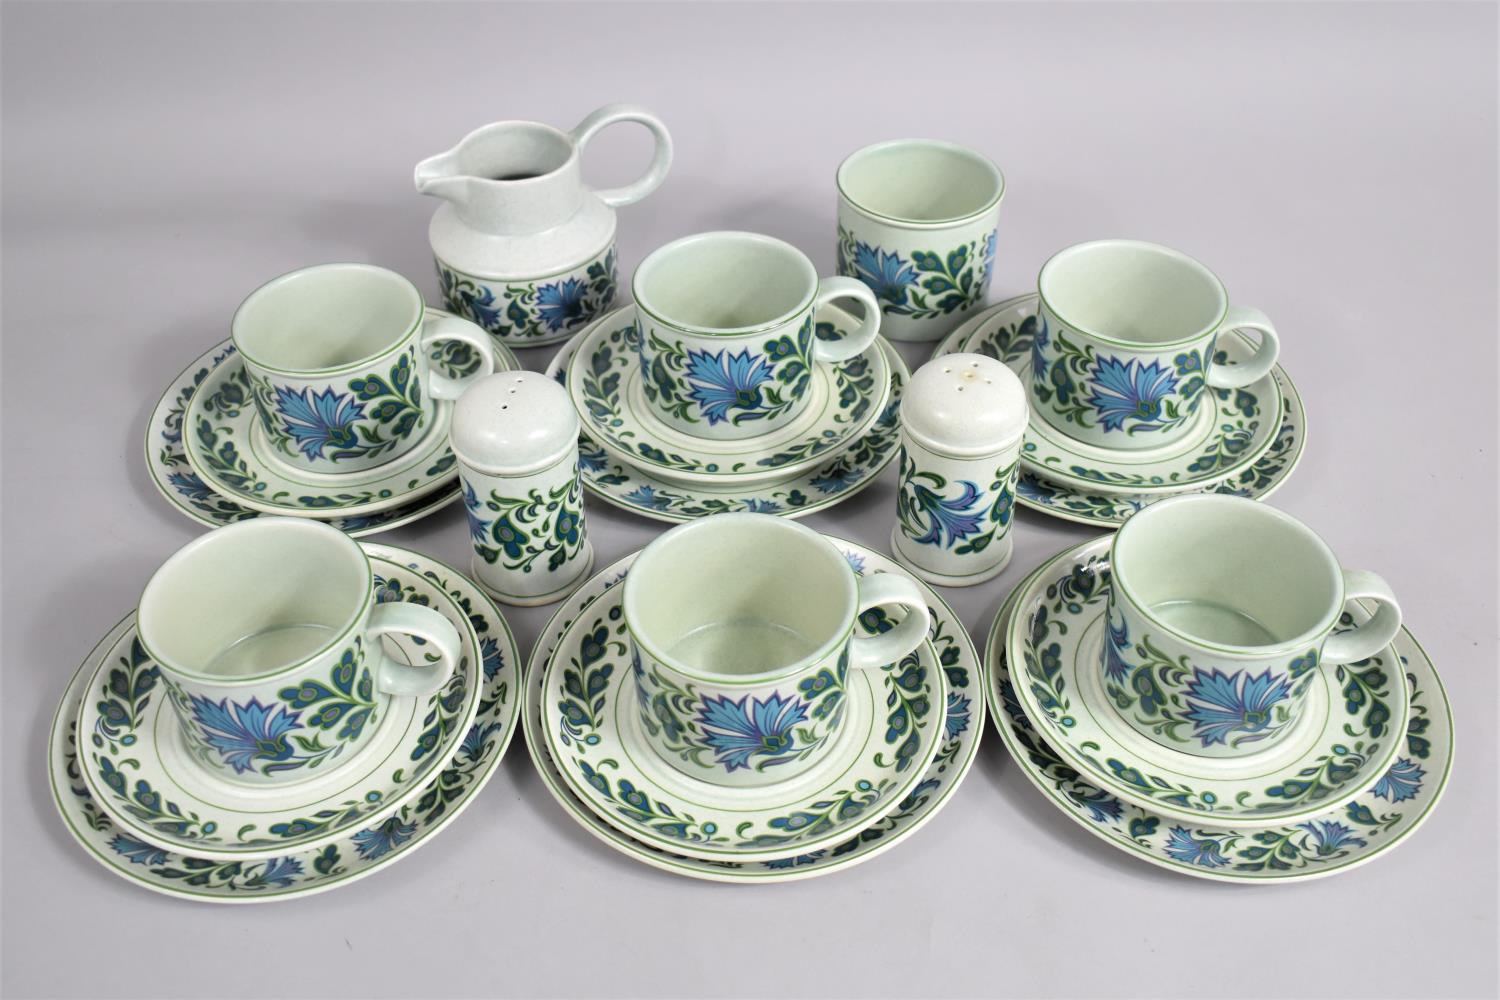 A Midwinter Stonehenge Pattern Service to comprise Six Cups, Saucers and Side Plates, Milk Jug,